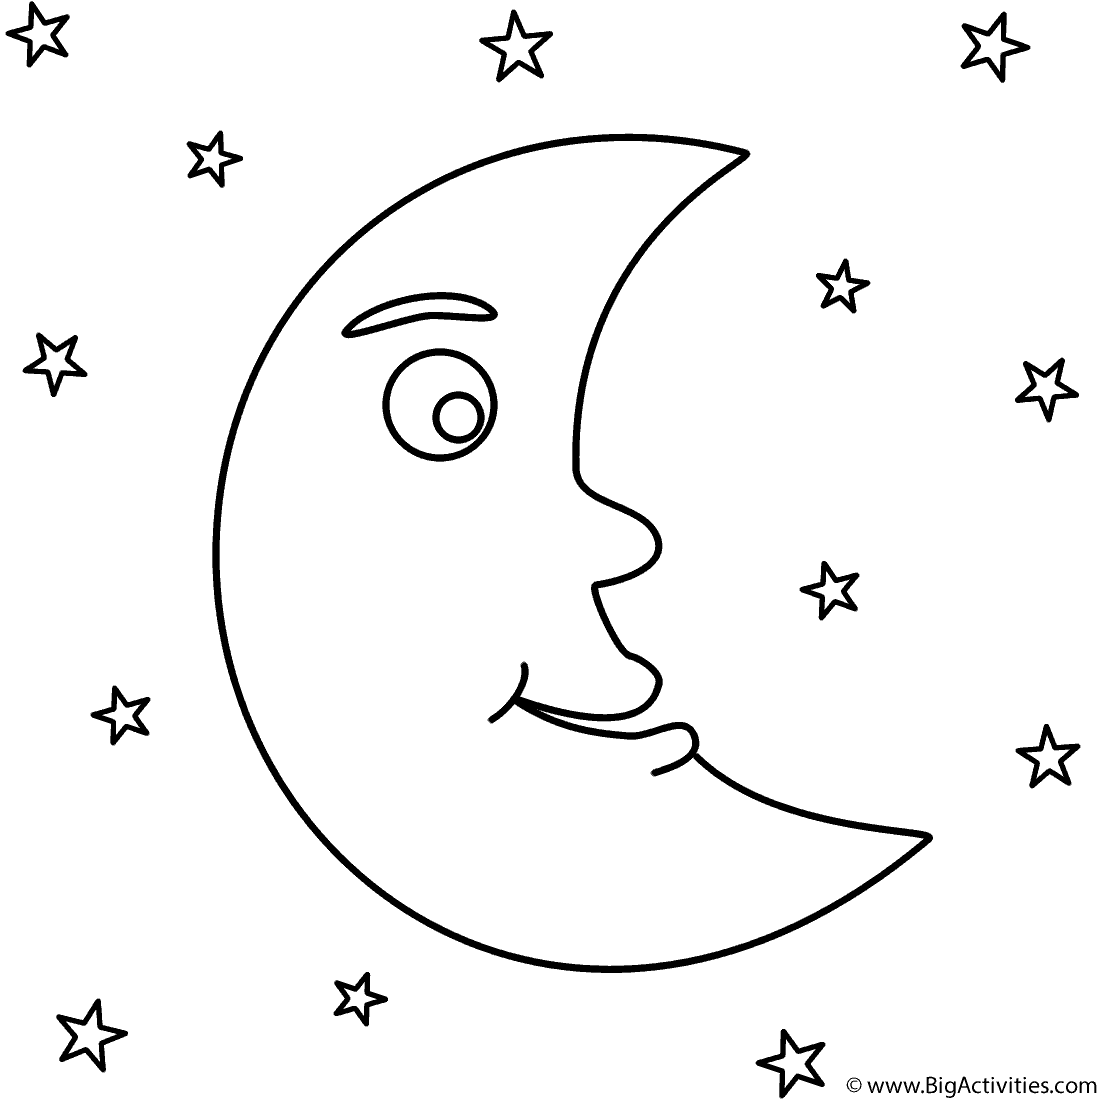 crescent-moon-with-stars-coloring-page-space